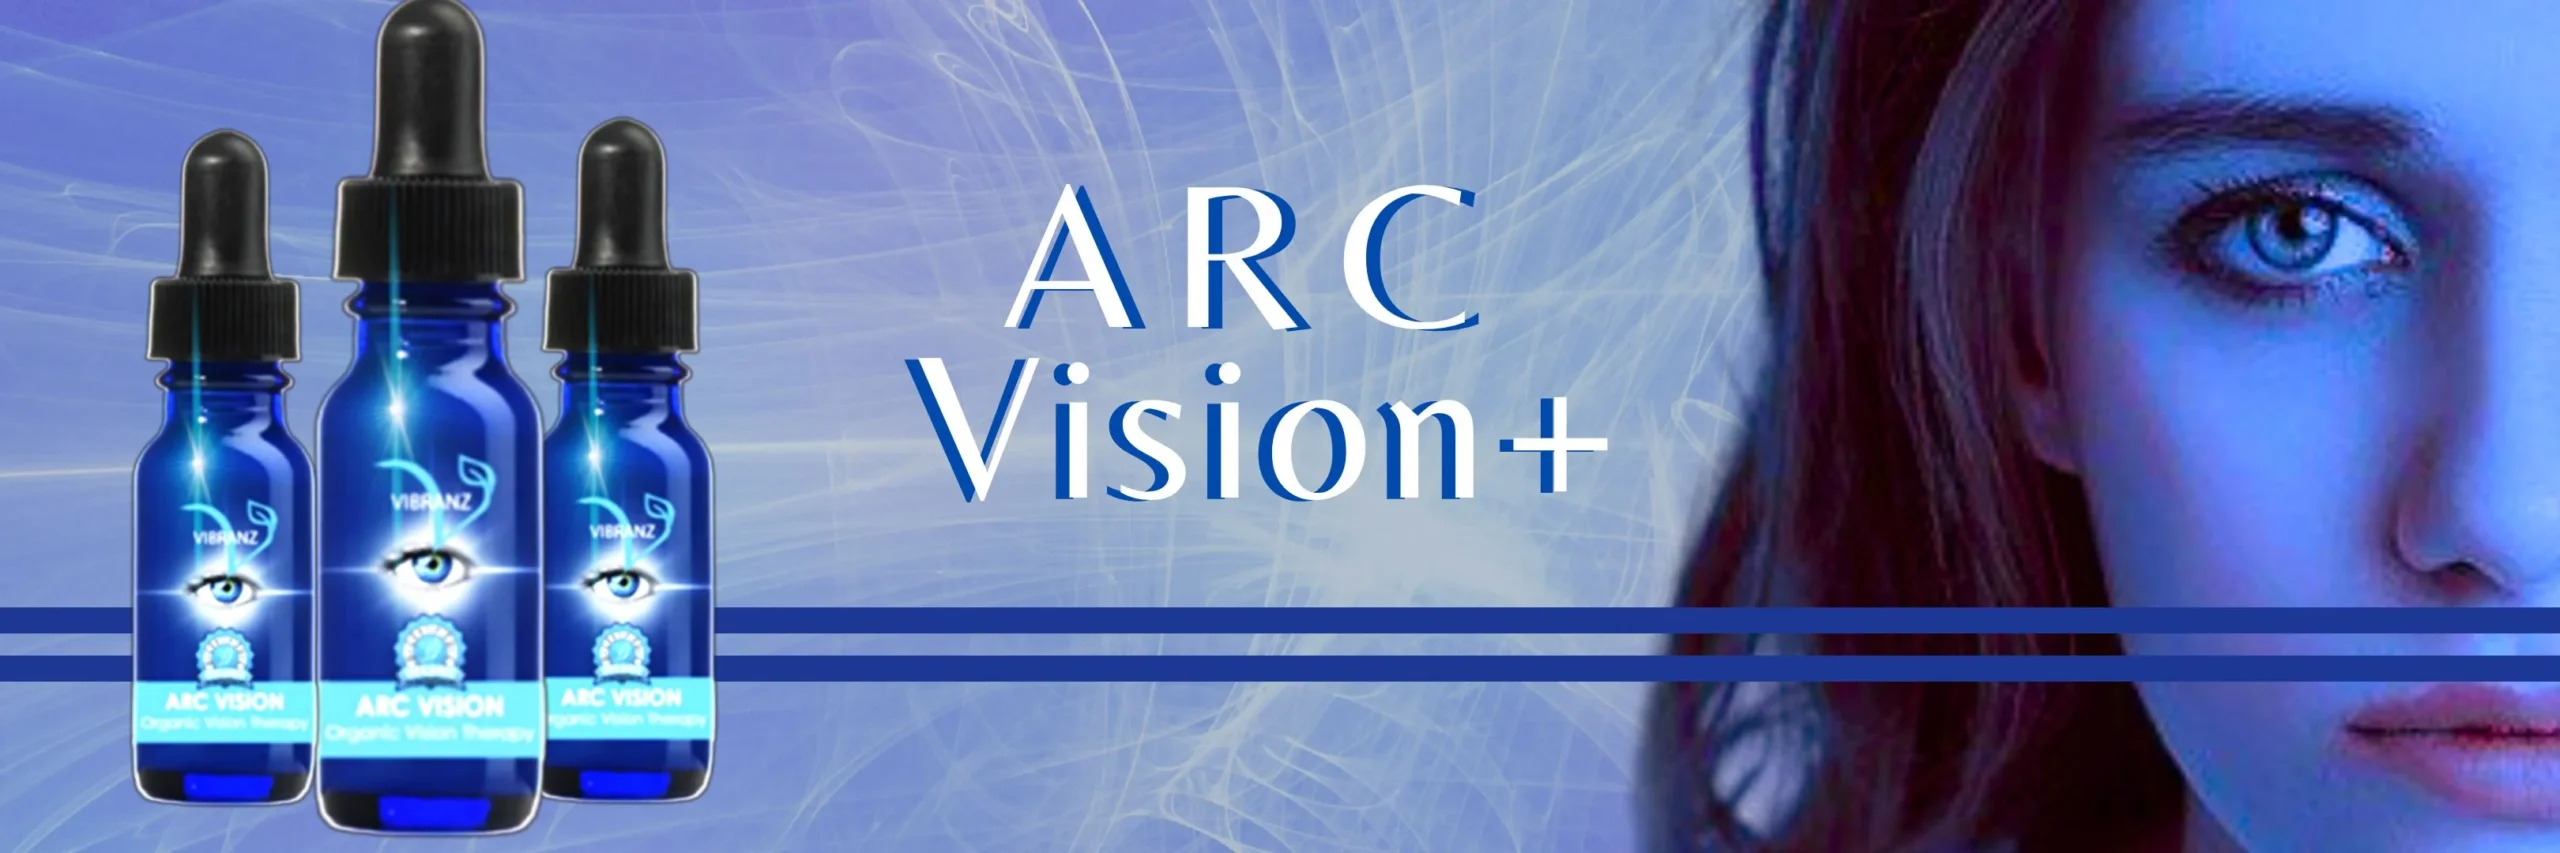 Arc Vision 1 1 scaled